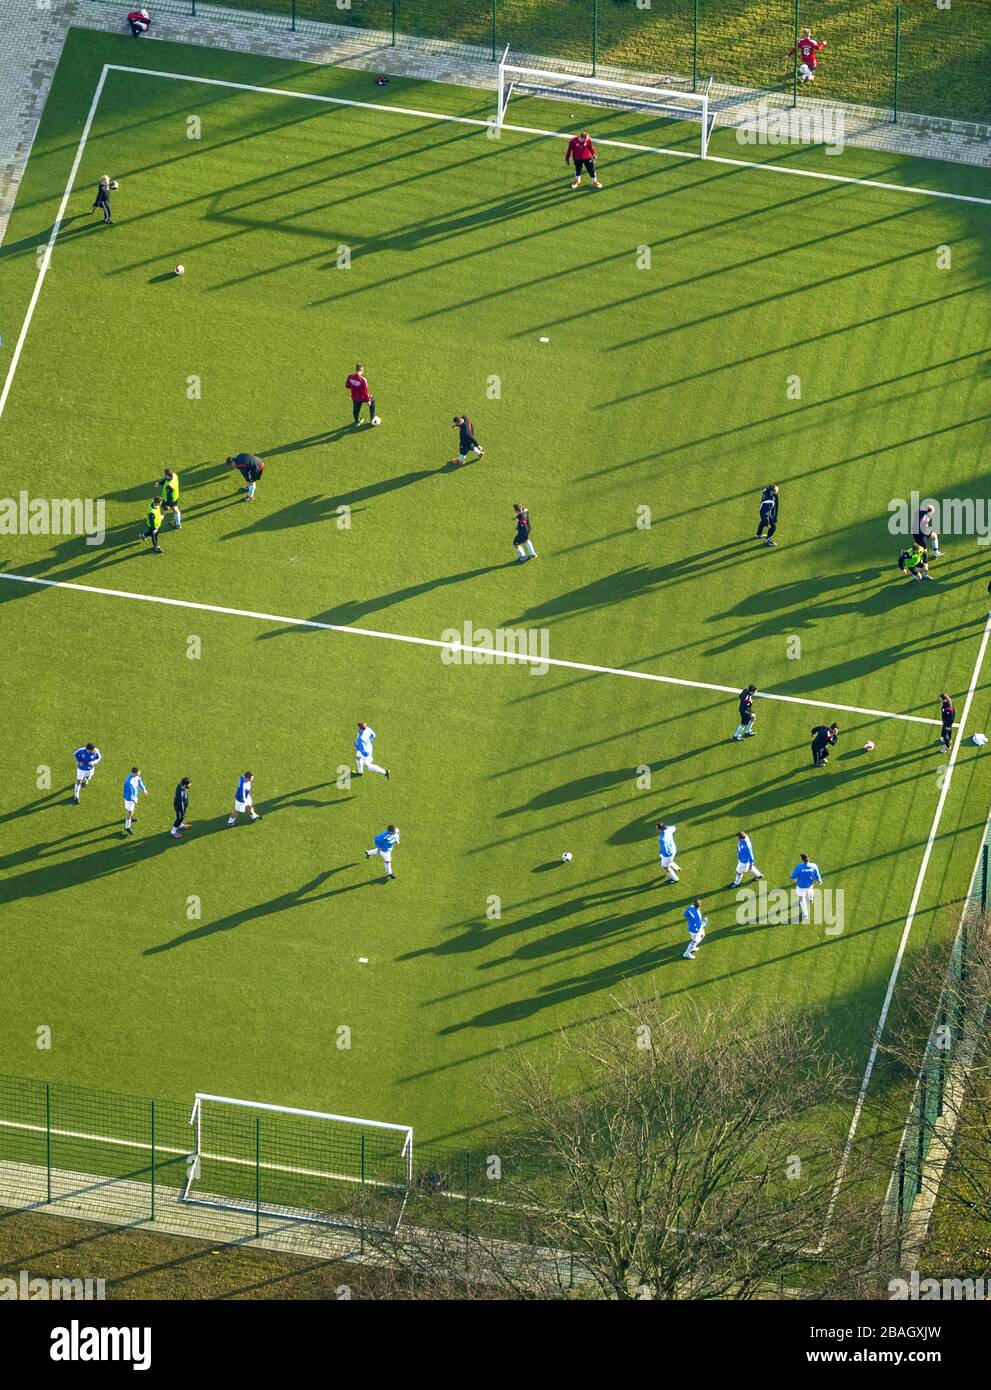 Football game on a artificial pitch in Dortmund, 19.01.2014, aerial view, Germany, North Rhine-Westphalia, Ruhr Area, Dortmund Stock Photo